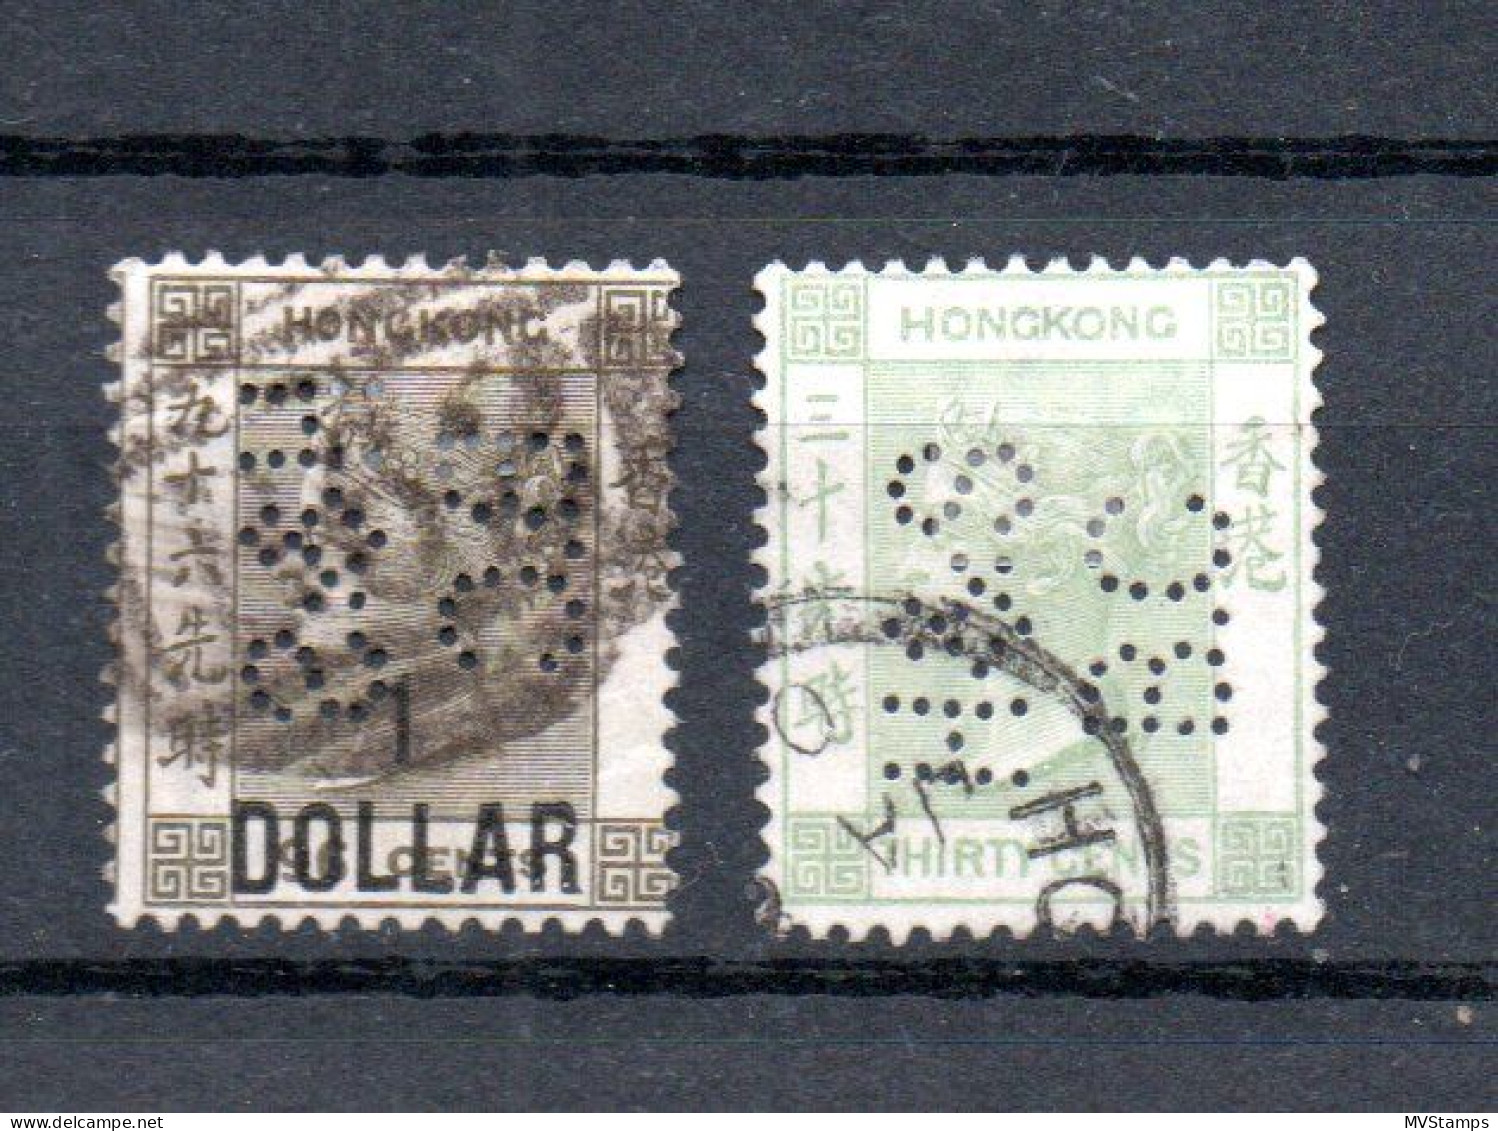 Hong Kong 1885/91 Old Def.Victoria Stamps With Perforation (HSBC) Nice Used - Used Stamps